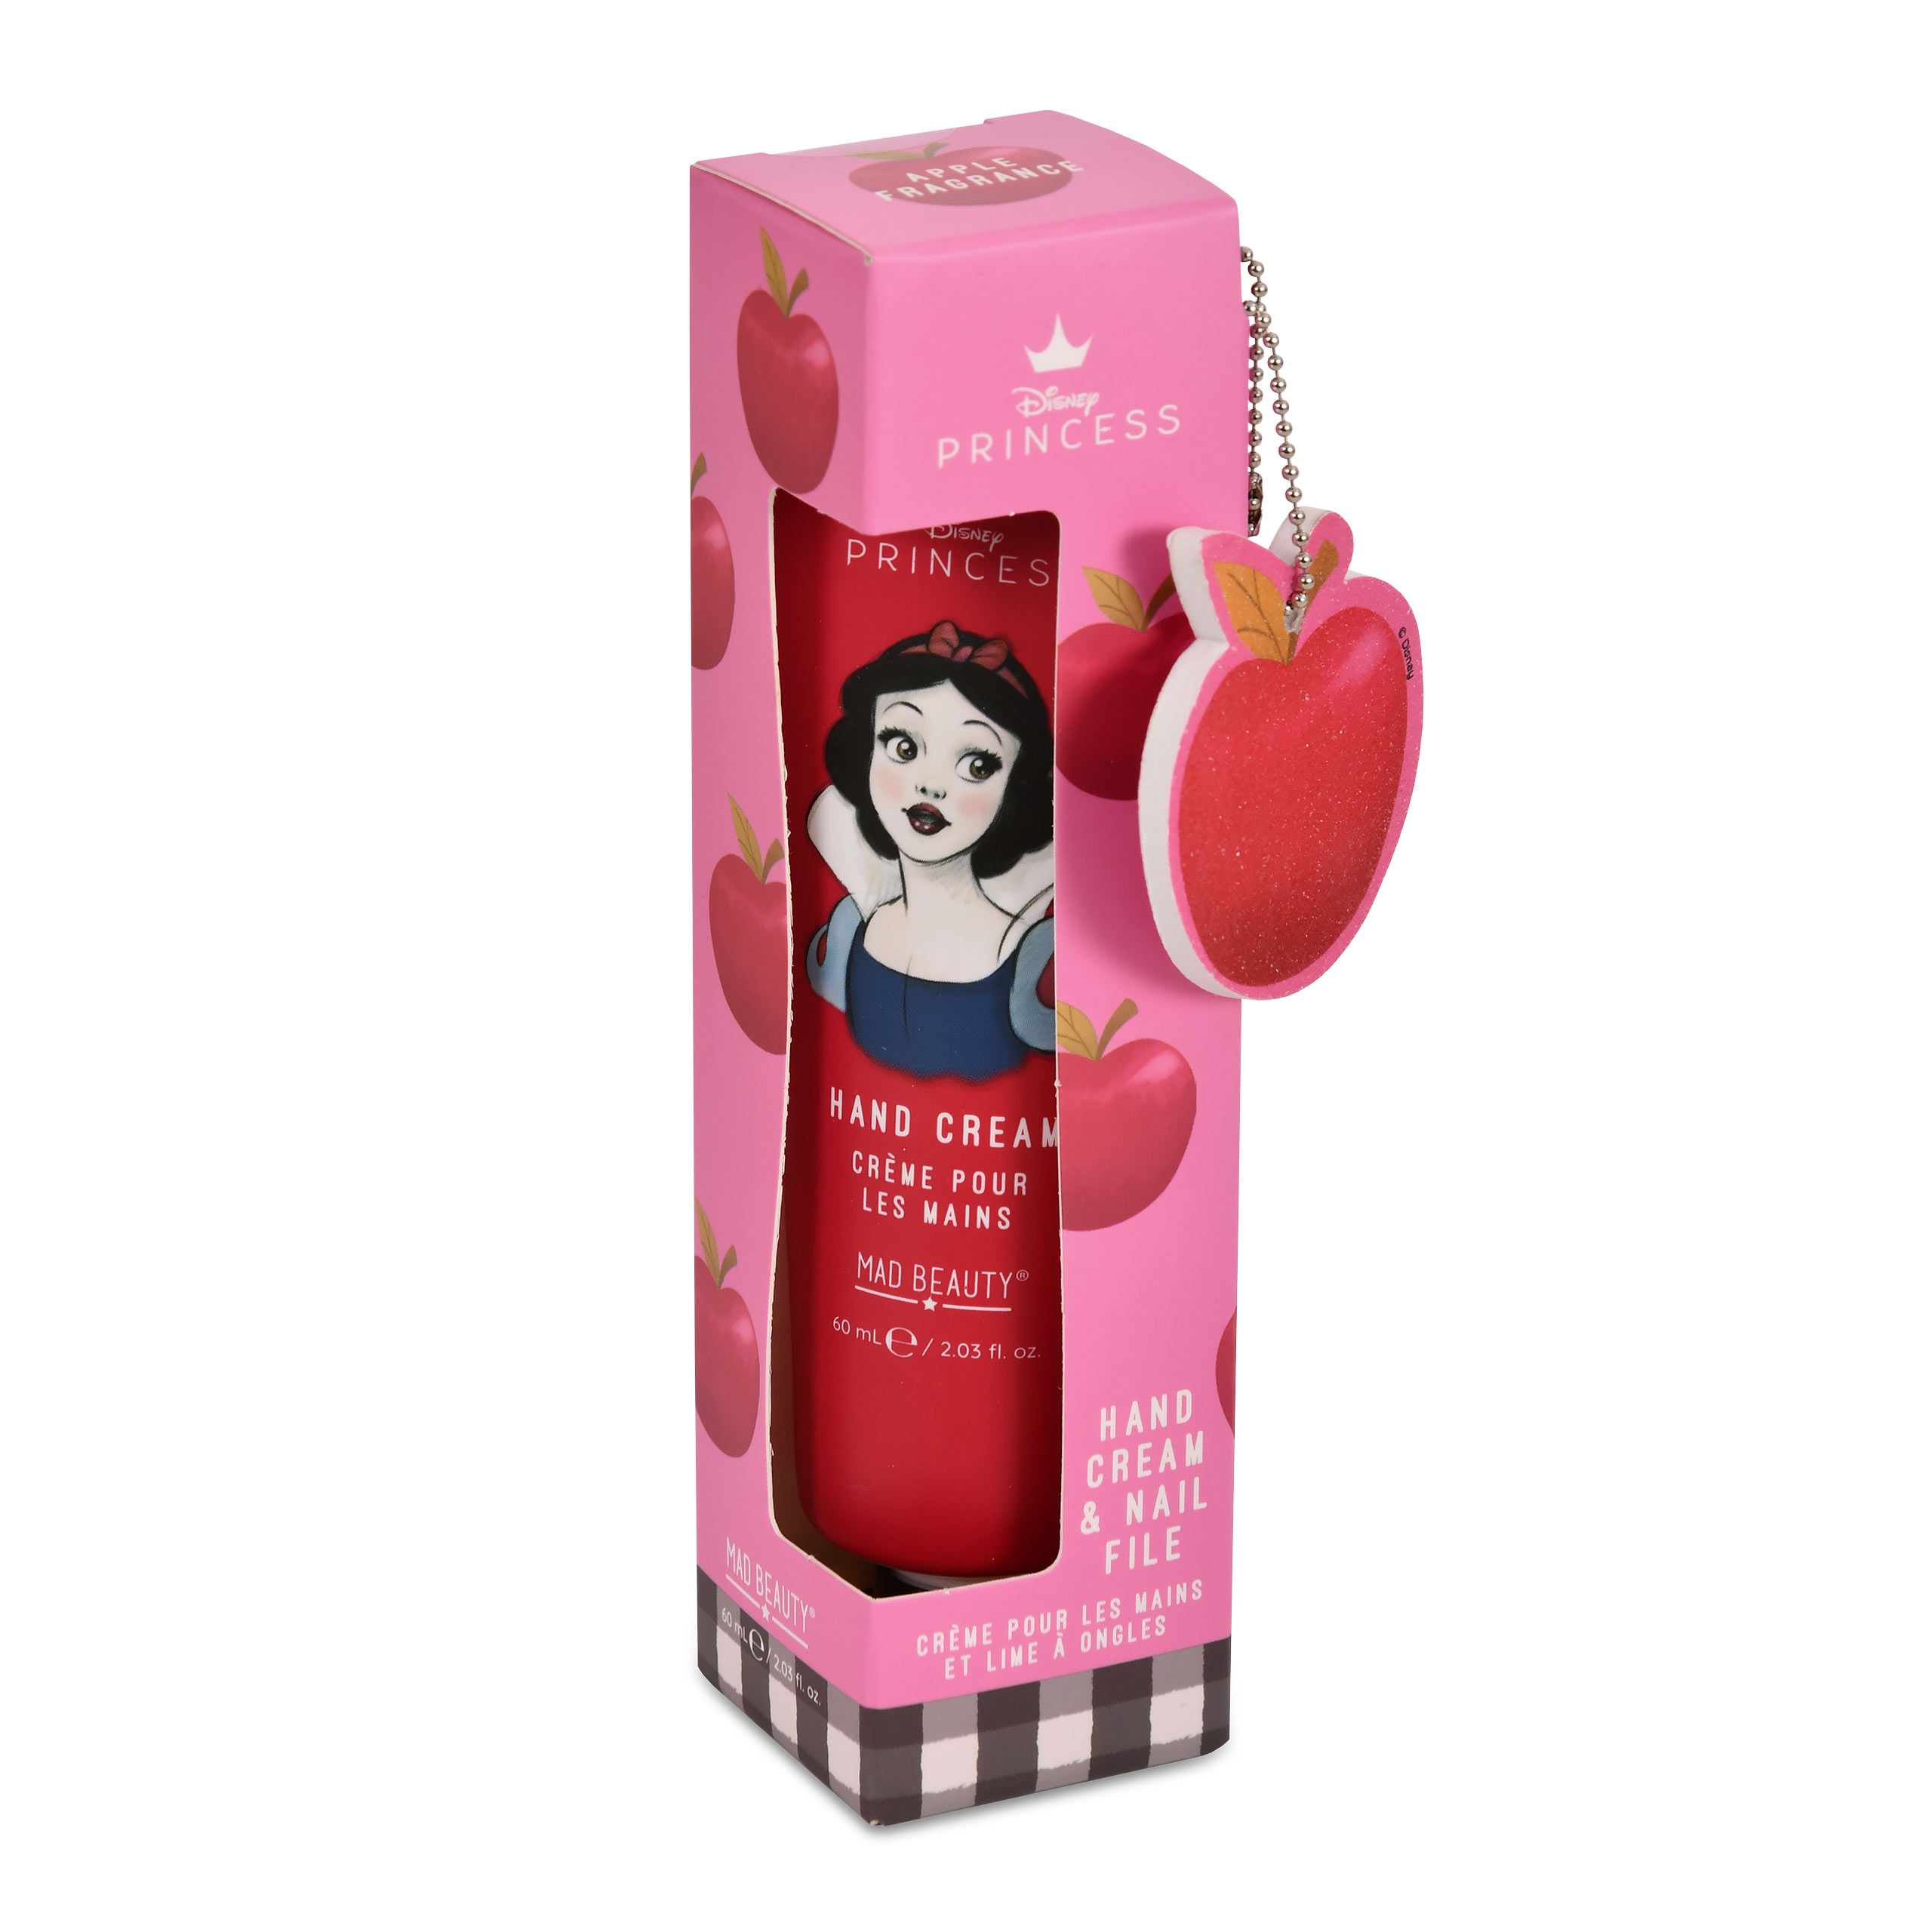 Snow White - Hand Cream and Nail File